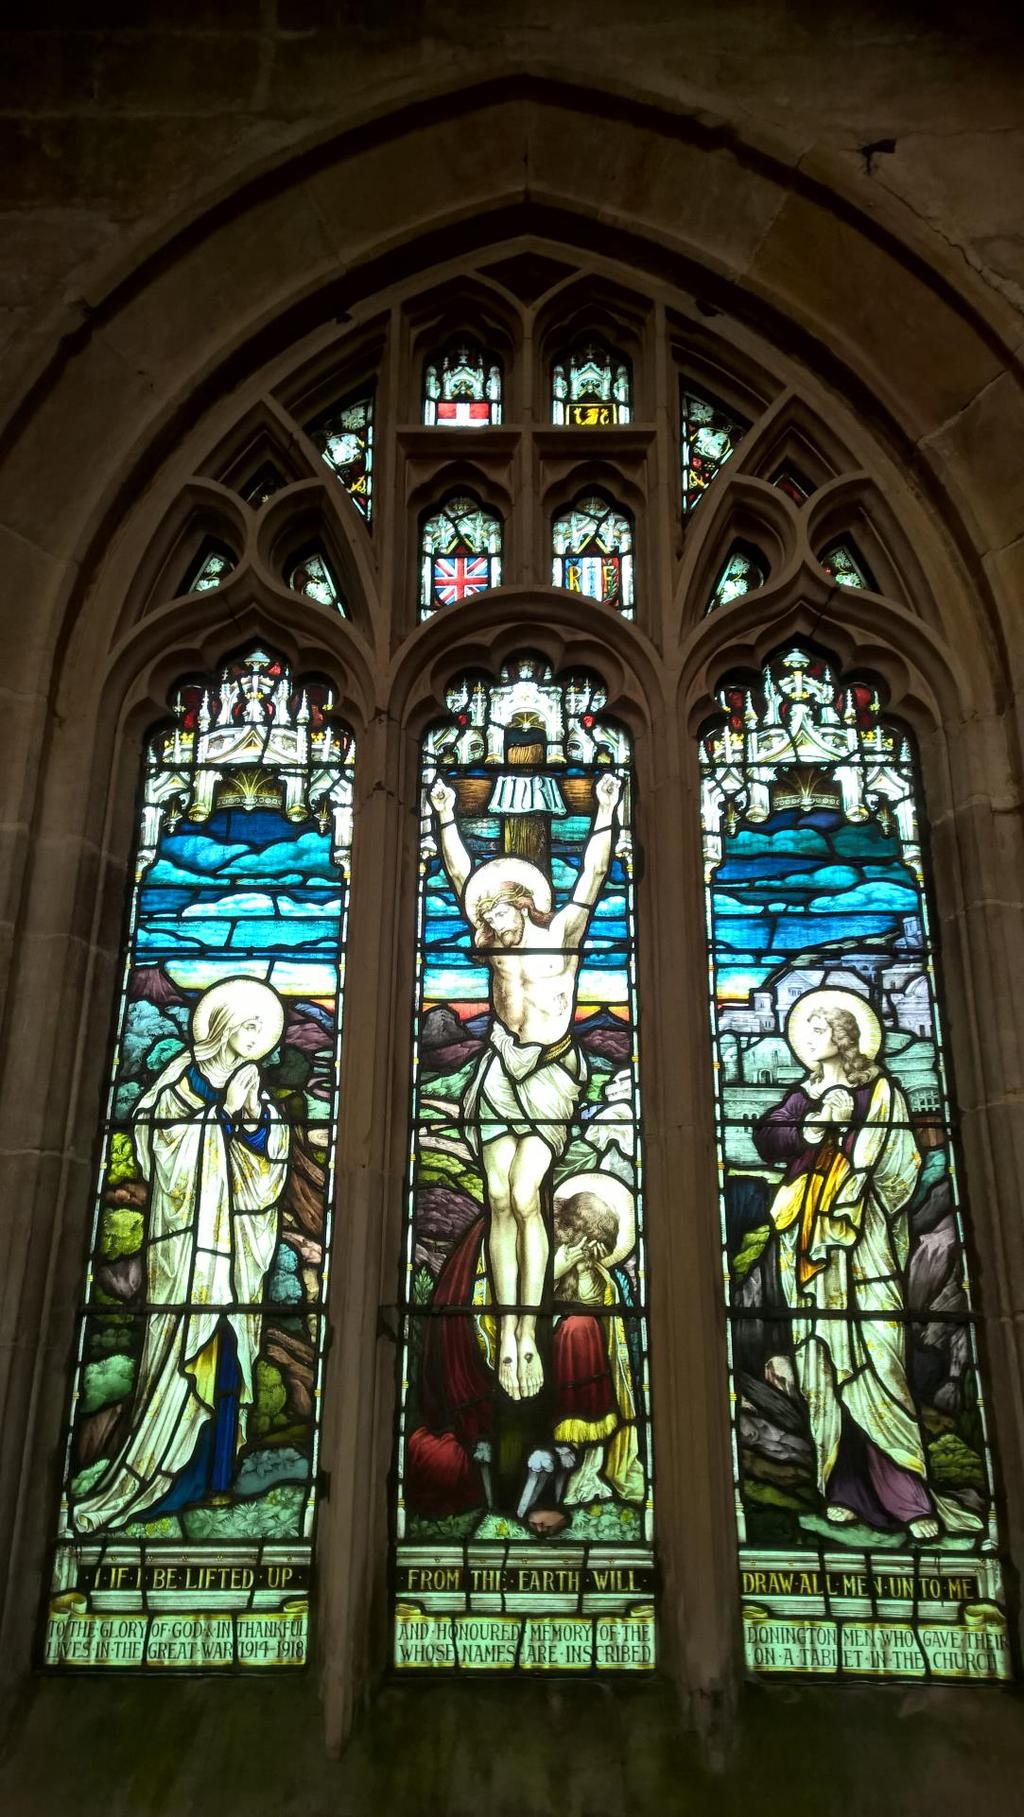 A Stained Glass Window is also located in St.